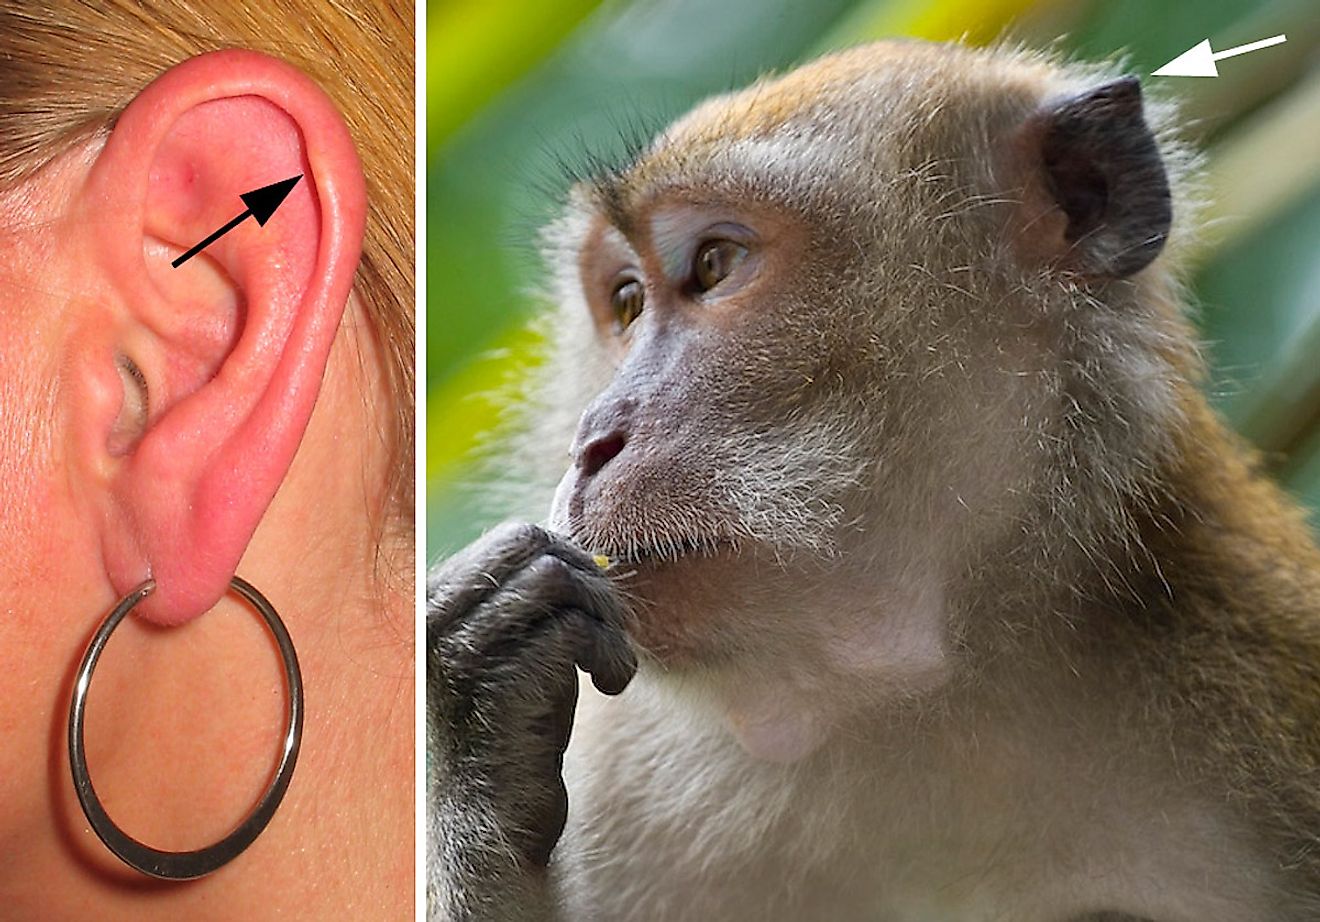 The muscles connected to the ears of a human do not develop enough to have the same mobility allowed to monkeys. Arrows show the vestigial structure called Darwin's tubercle. Image credit: Wikimedia.org